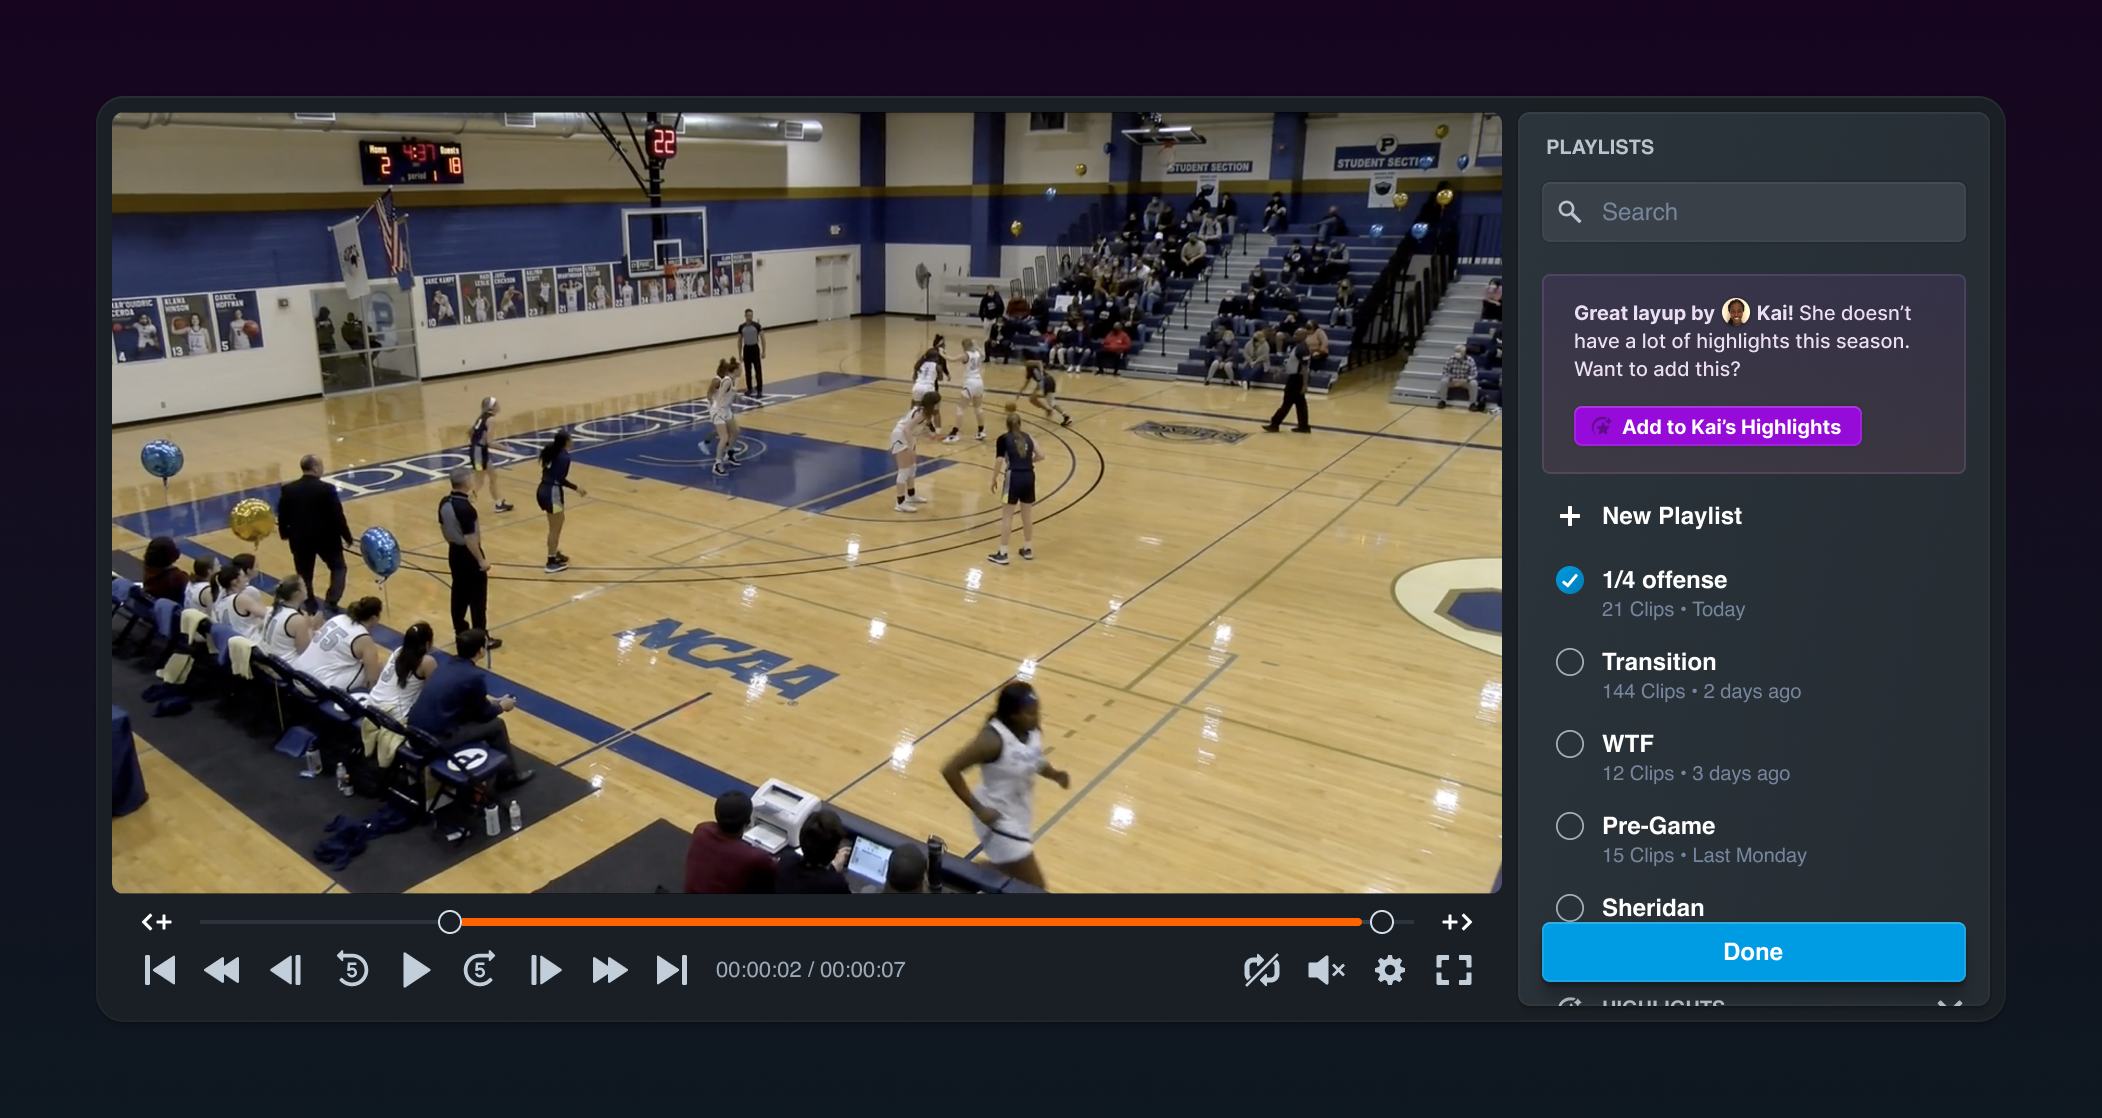 A screenshot of the Curation interface, showing a video player on the left, and a list of playlists to select on the right. Above the lists of playlists is a call-to-action to add this clip to an athlete's highlights.